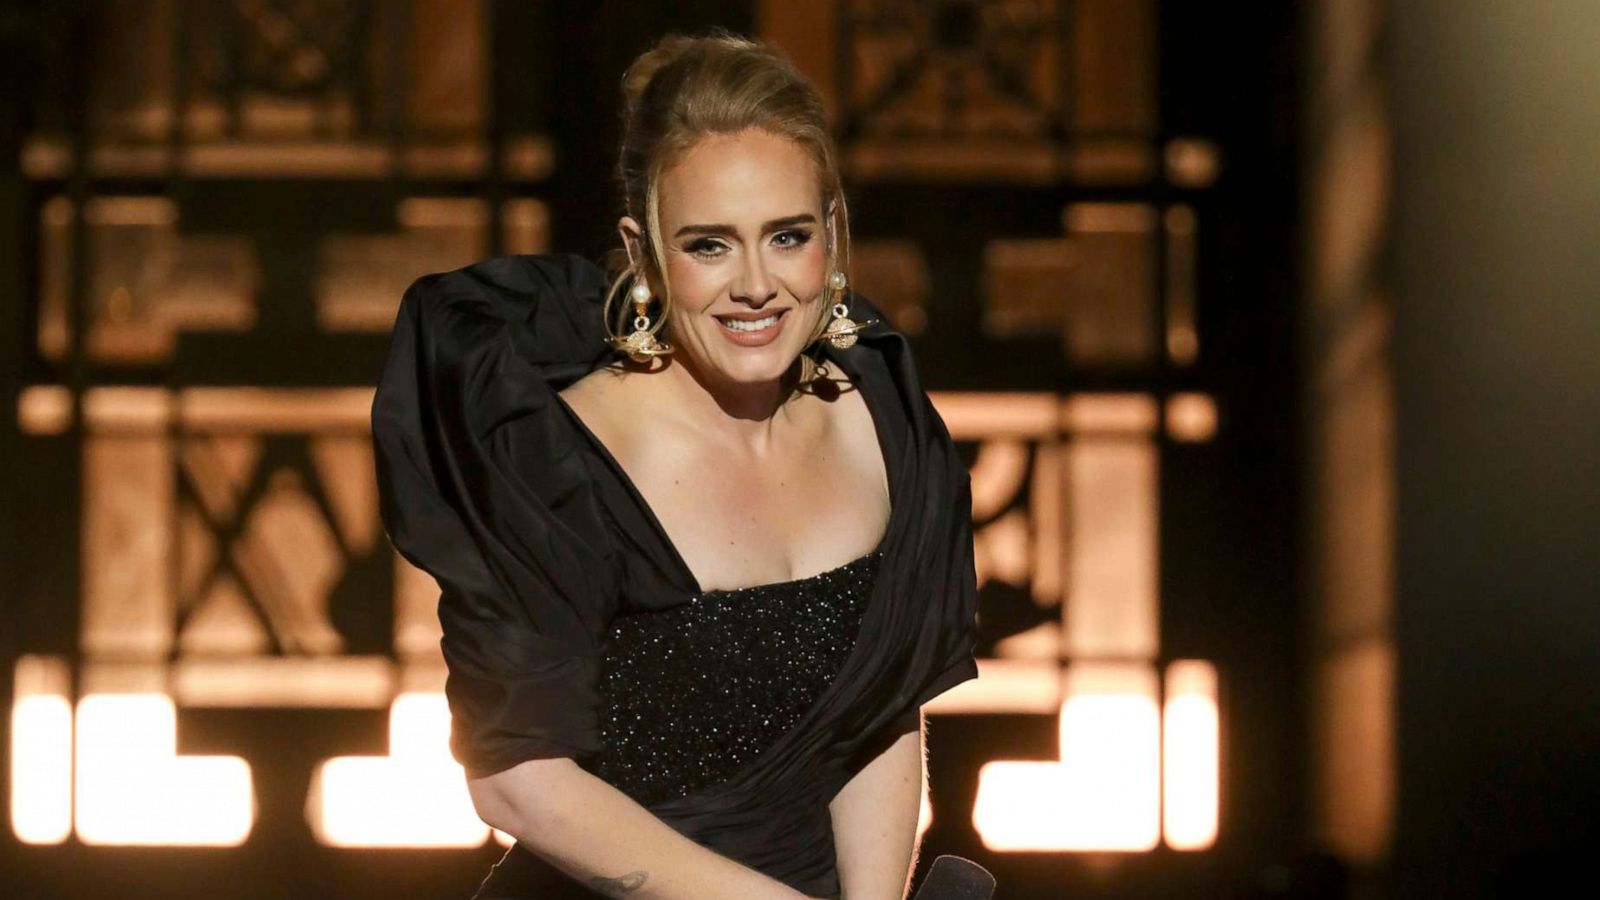 Adele's Stanley Cup: The cheapest place to buy it